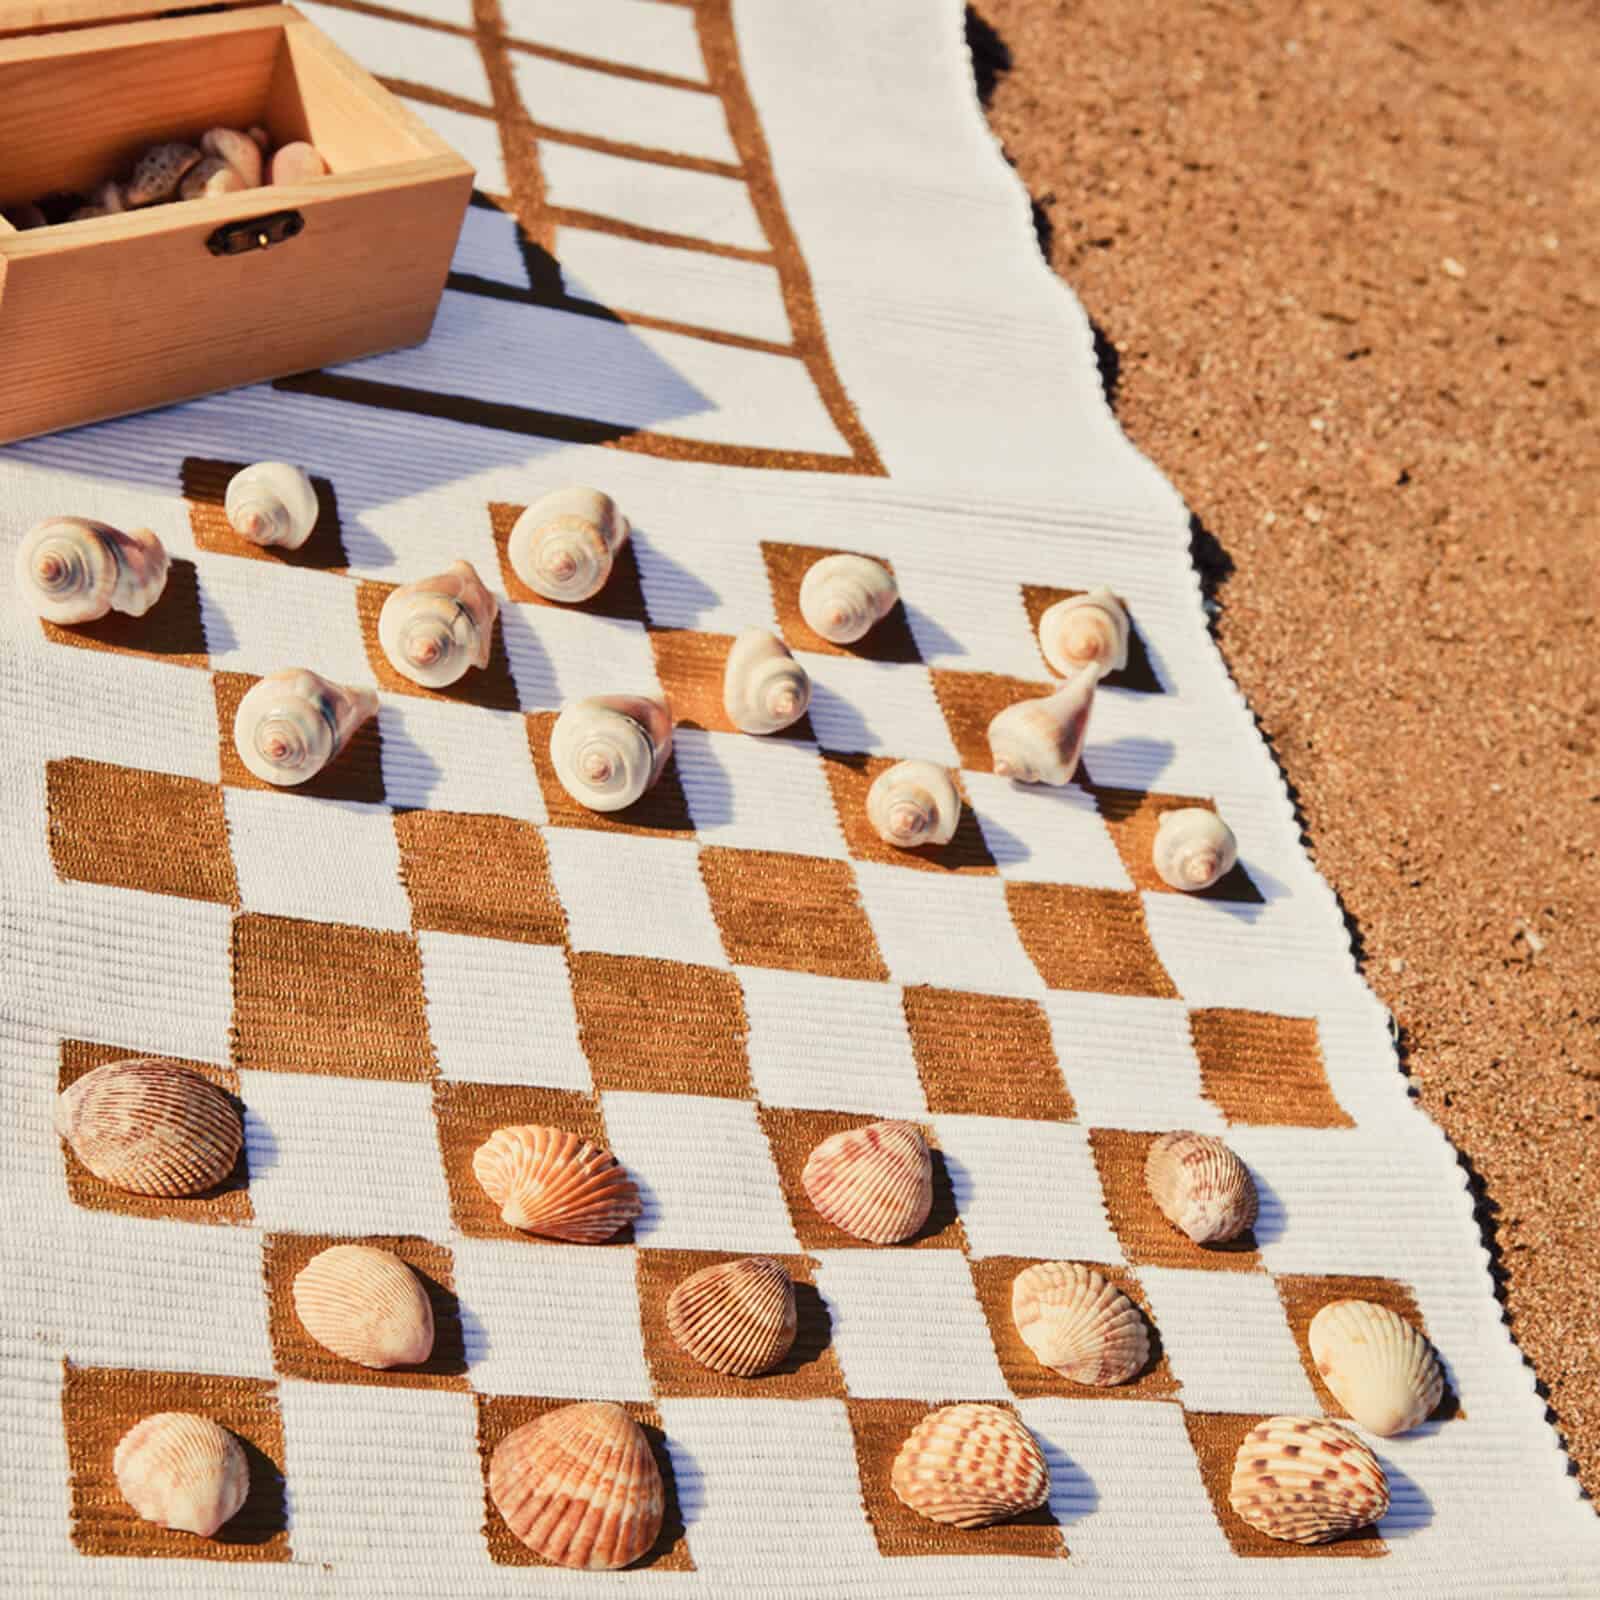 Beach Checkers on Blanket